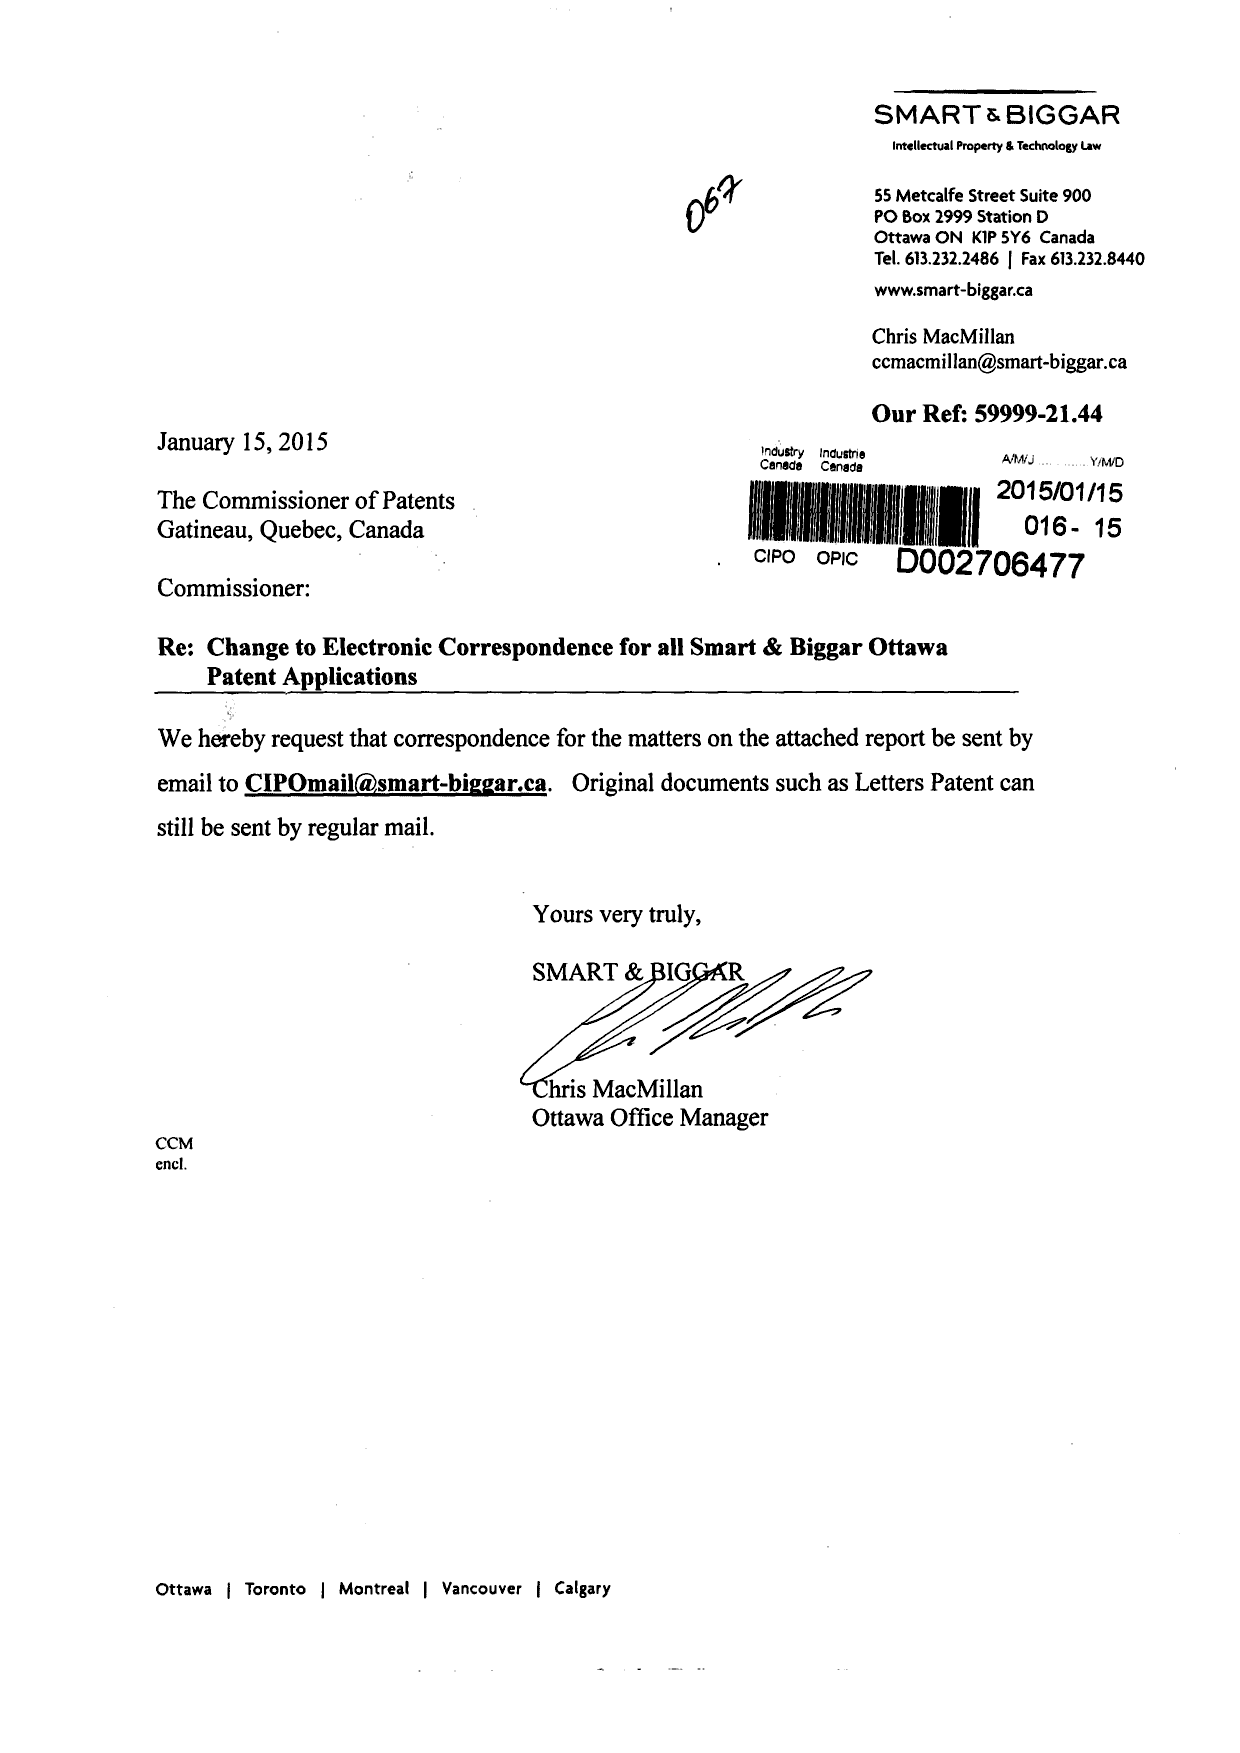 Canadian Patent Document 2657213. Change to the Method of Correspondence 20150115. Image 1 of 2